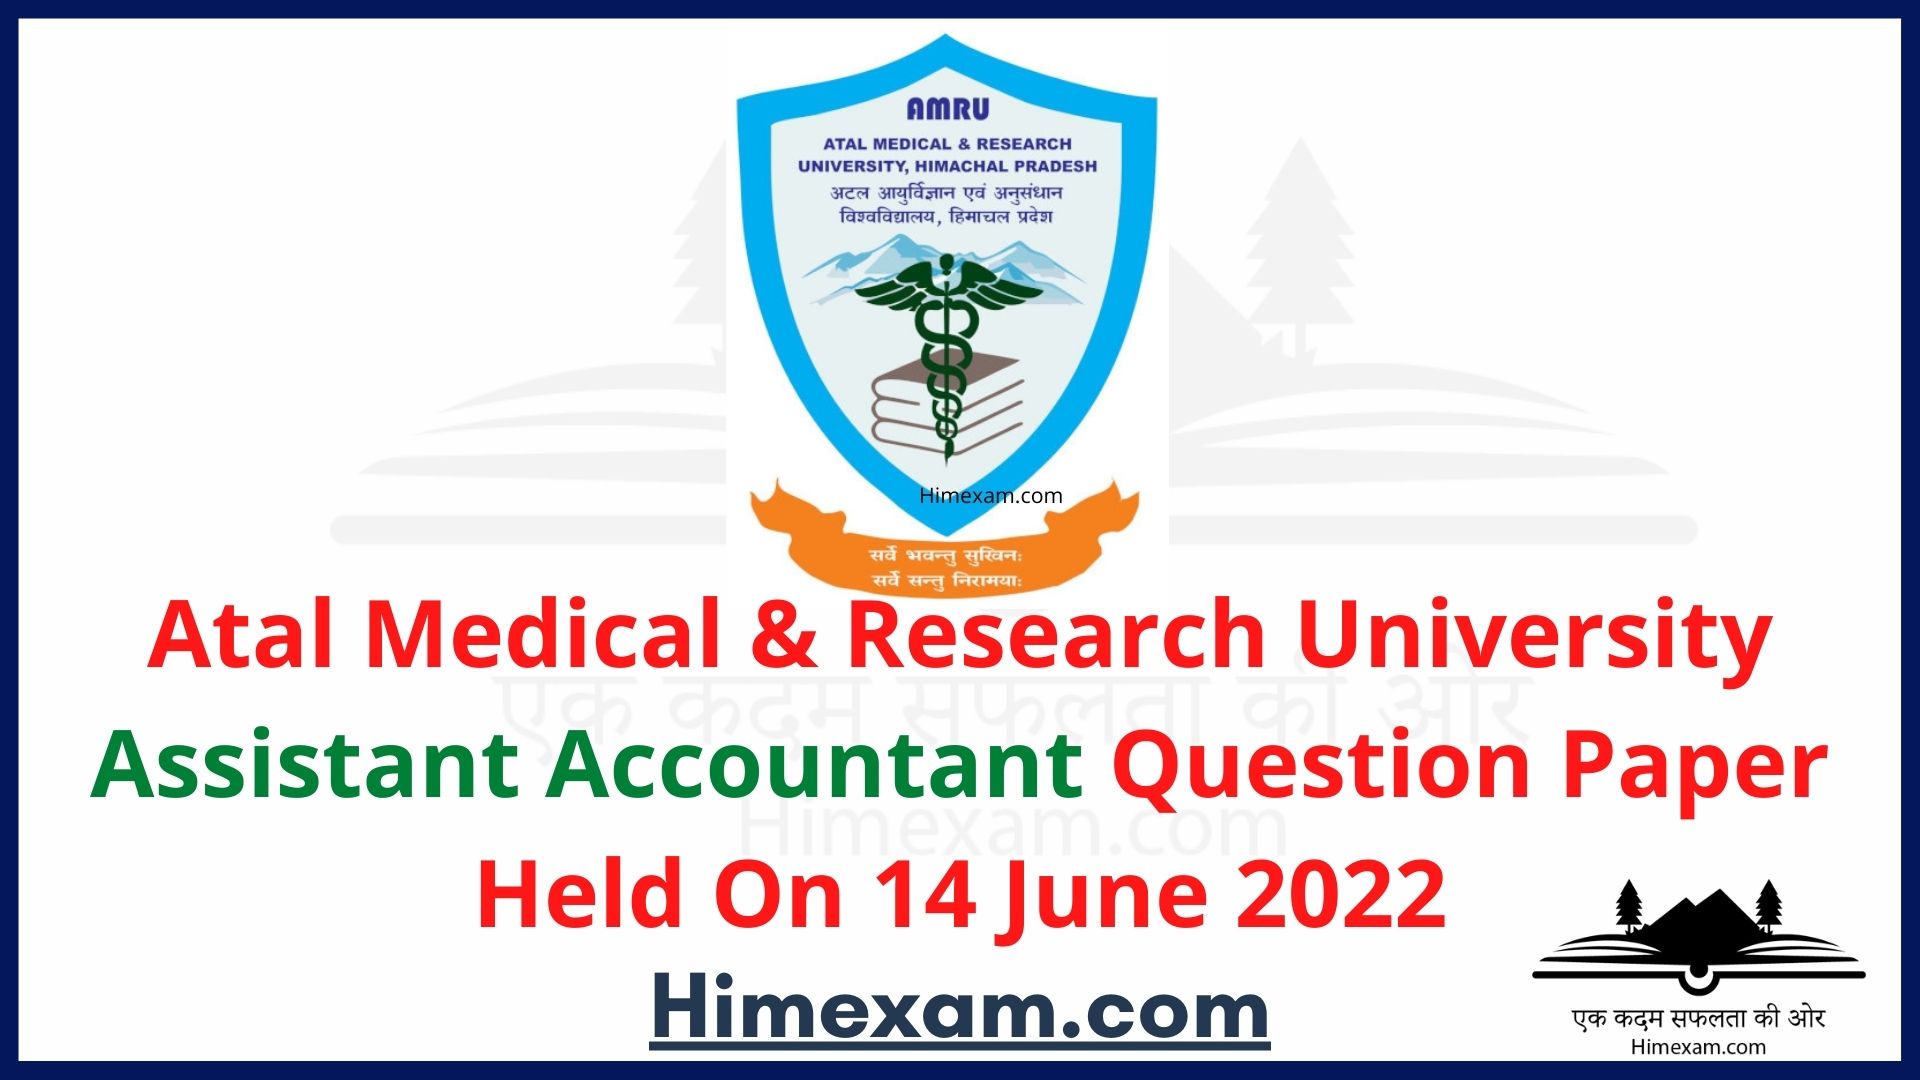 Atal Medical & Research University Assistant Accountant Question Paper Held On 14 June 2022